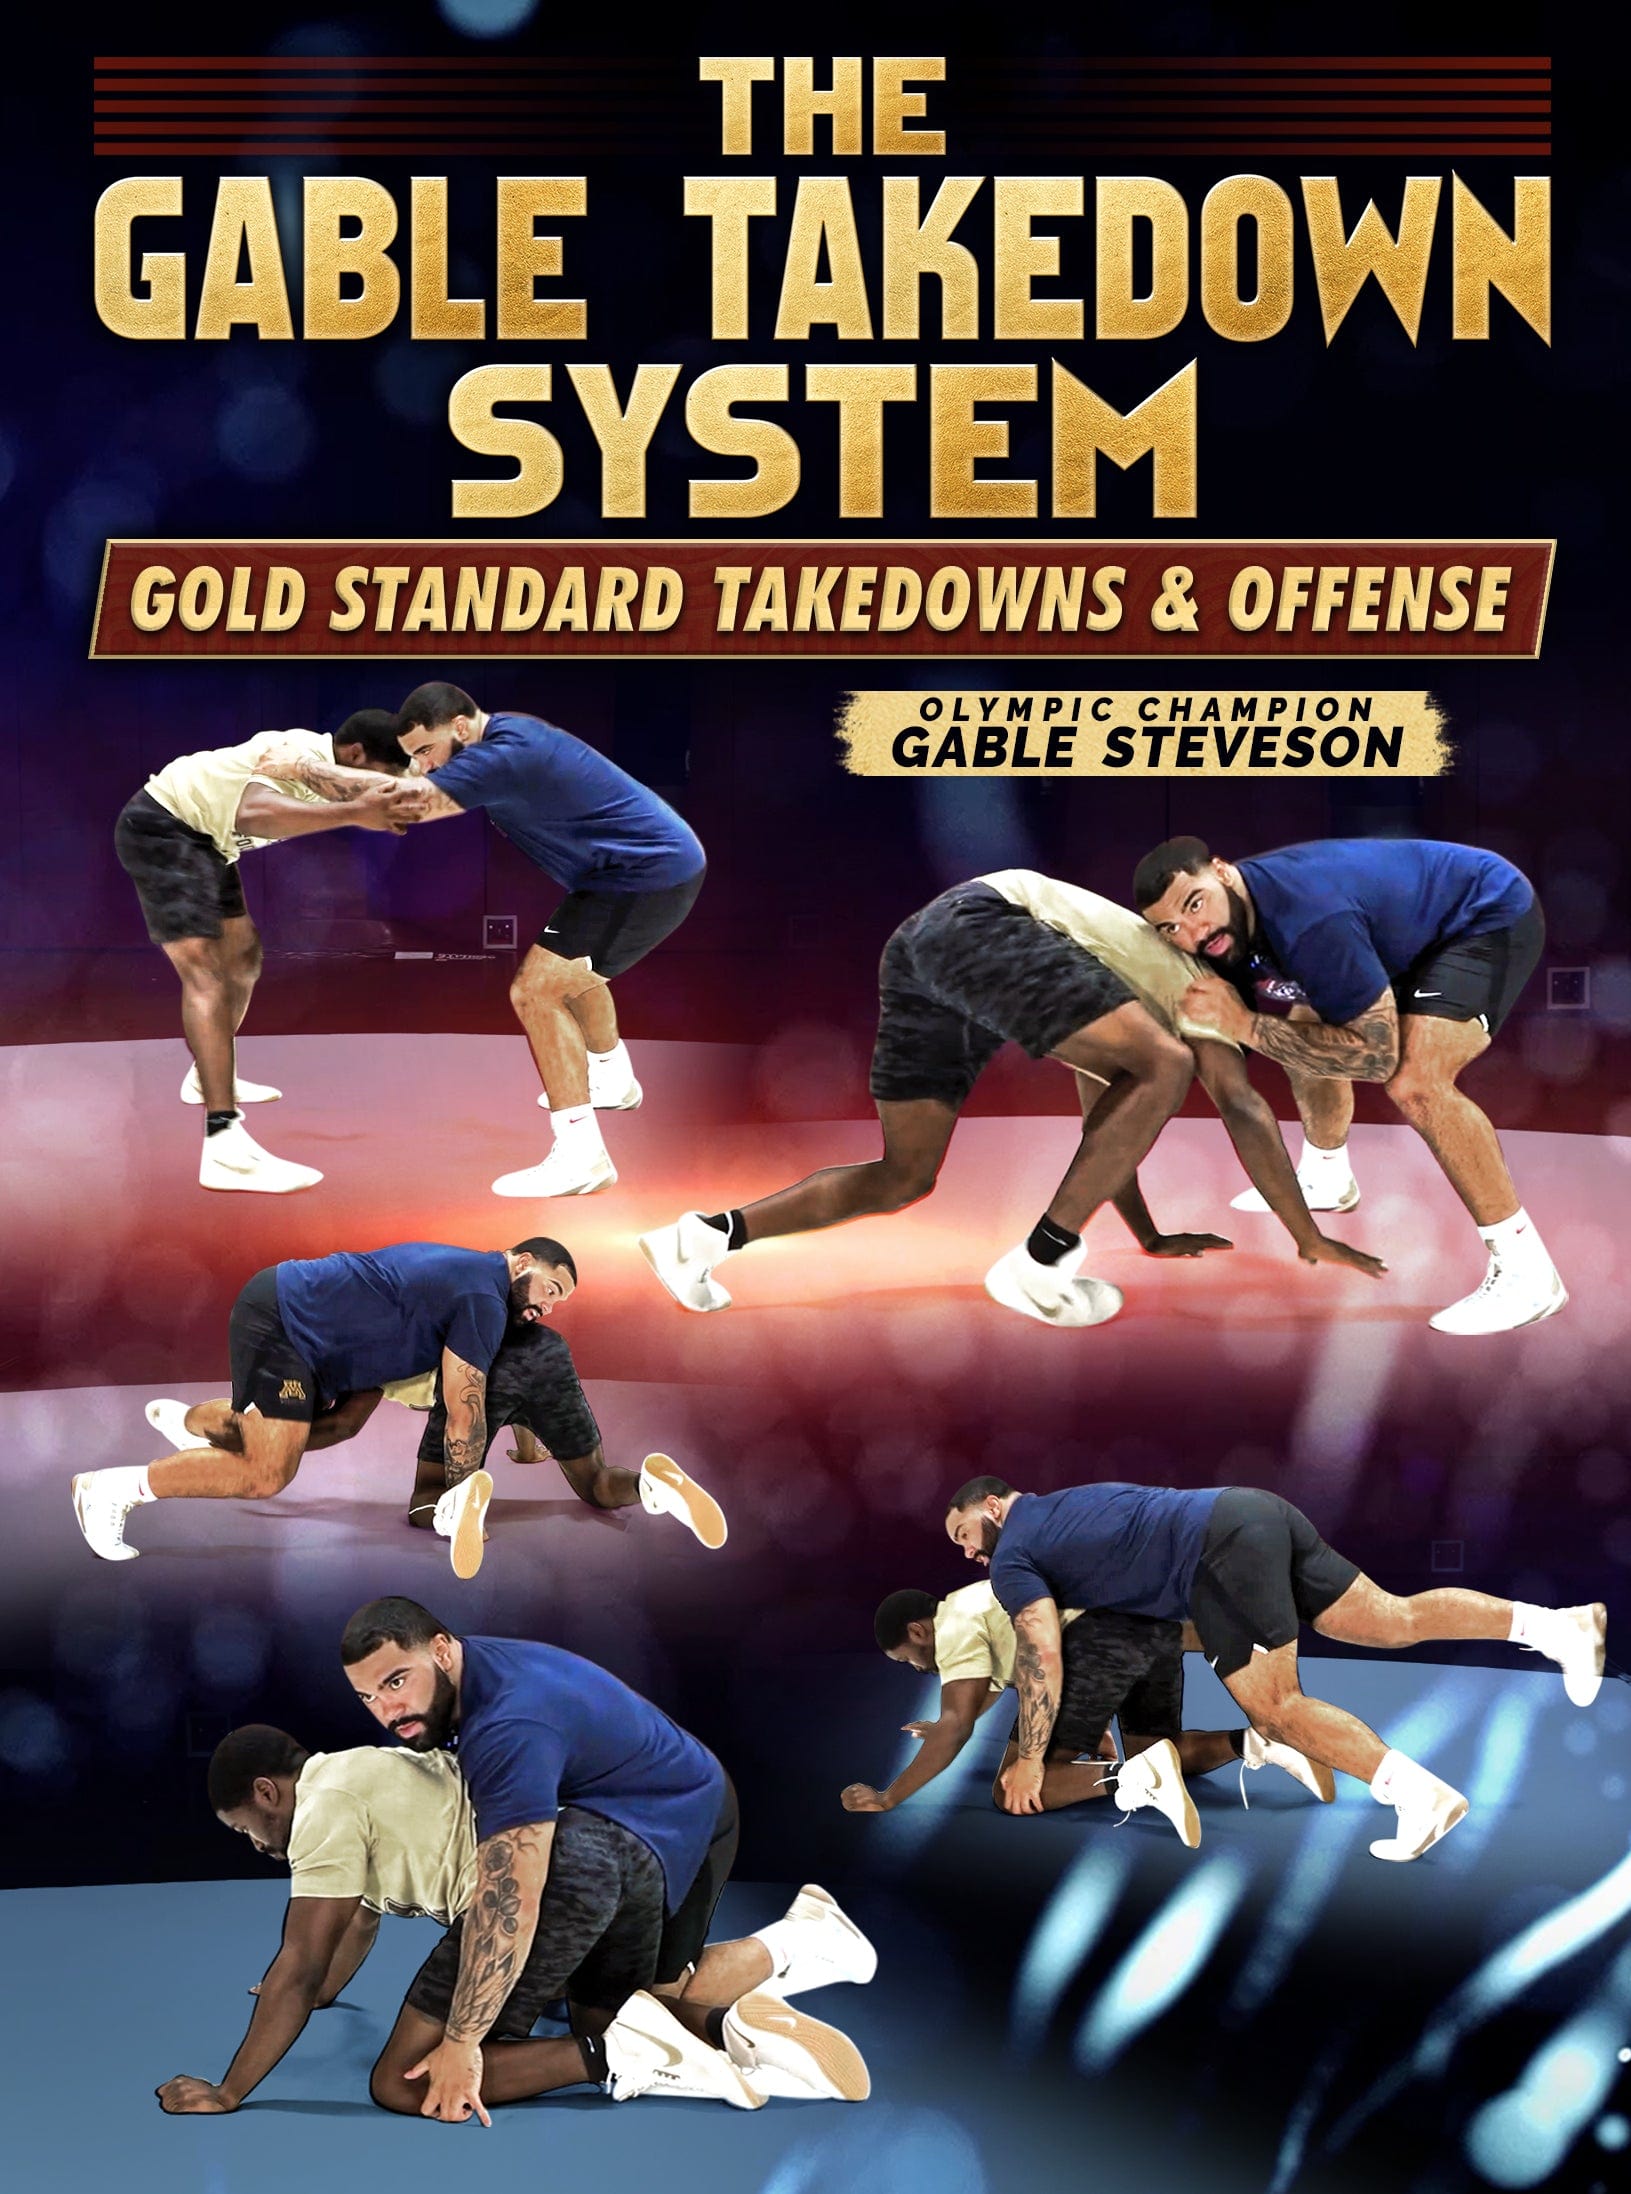 The Gable Takedown System by Gable Steveson - Fanatic Wrestling